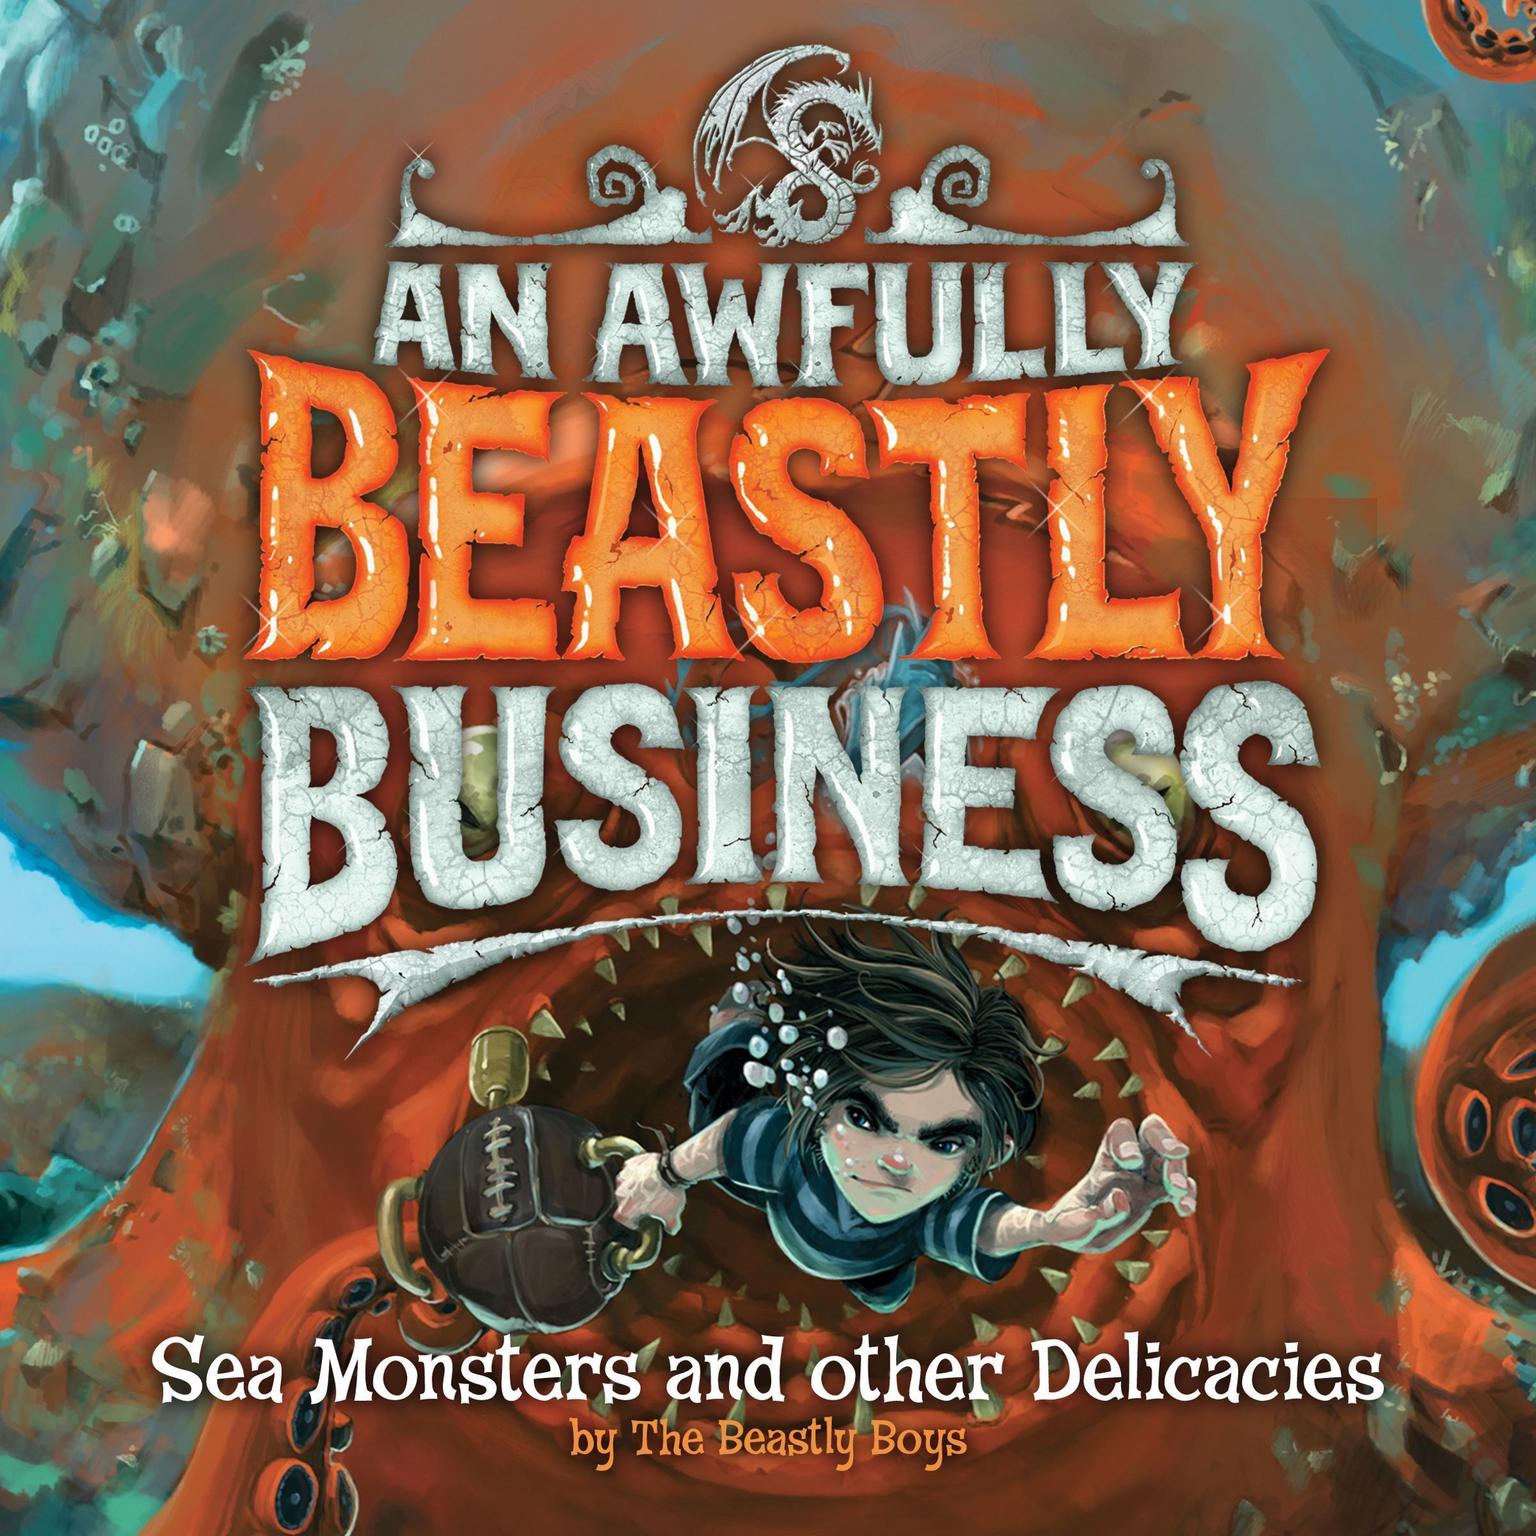 Sea Monsters and Other Delicacies: An Awfully Beastly Business Book Two Audiobook, by David Sinden